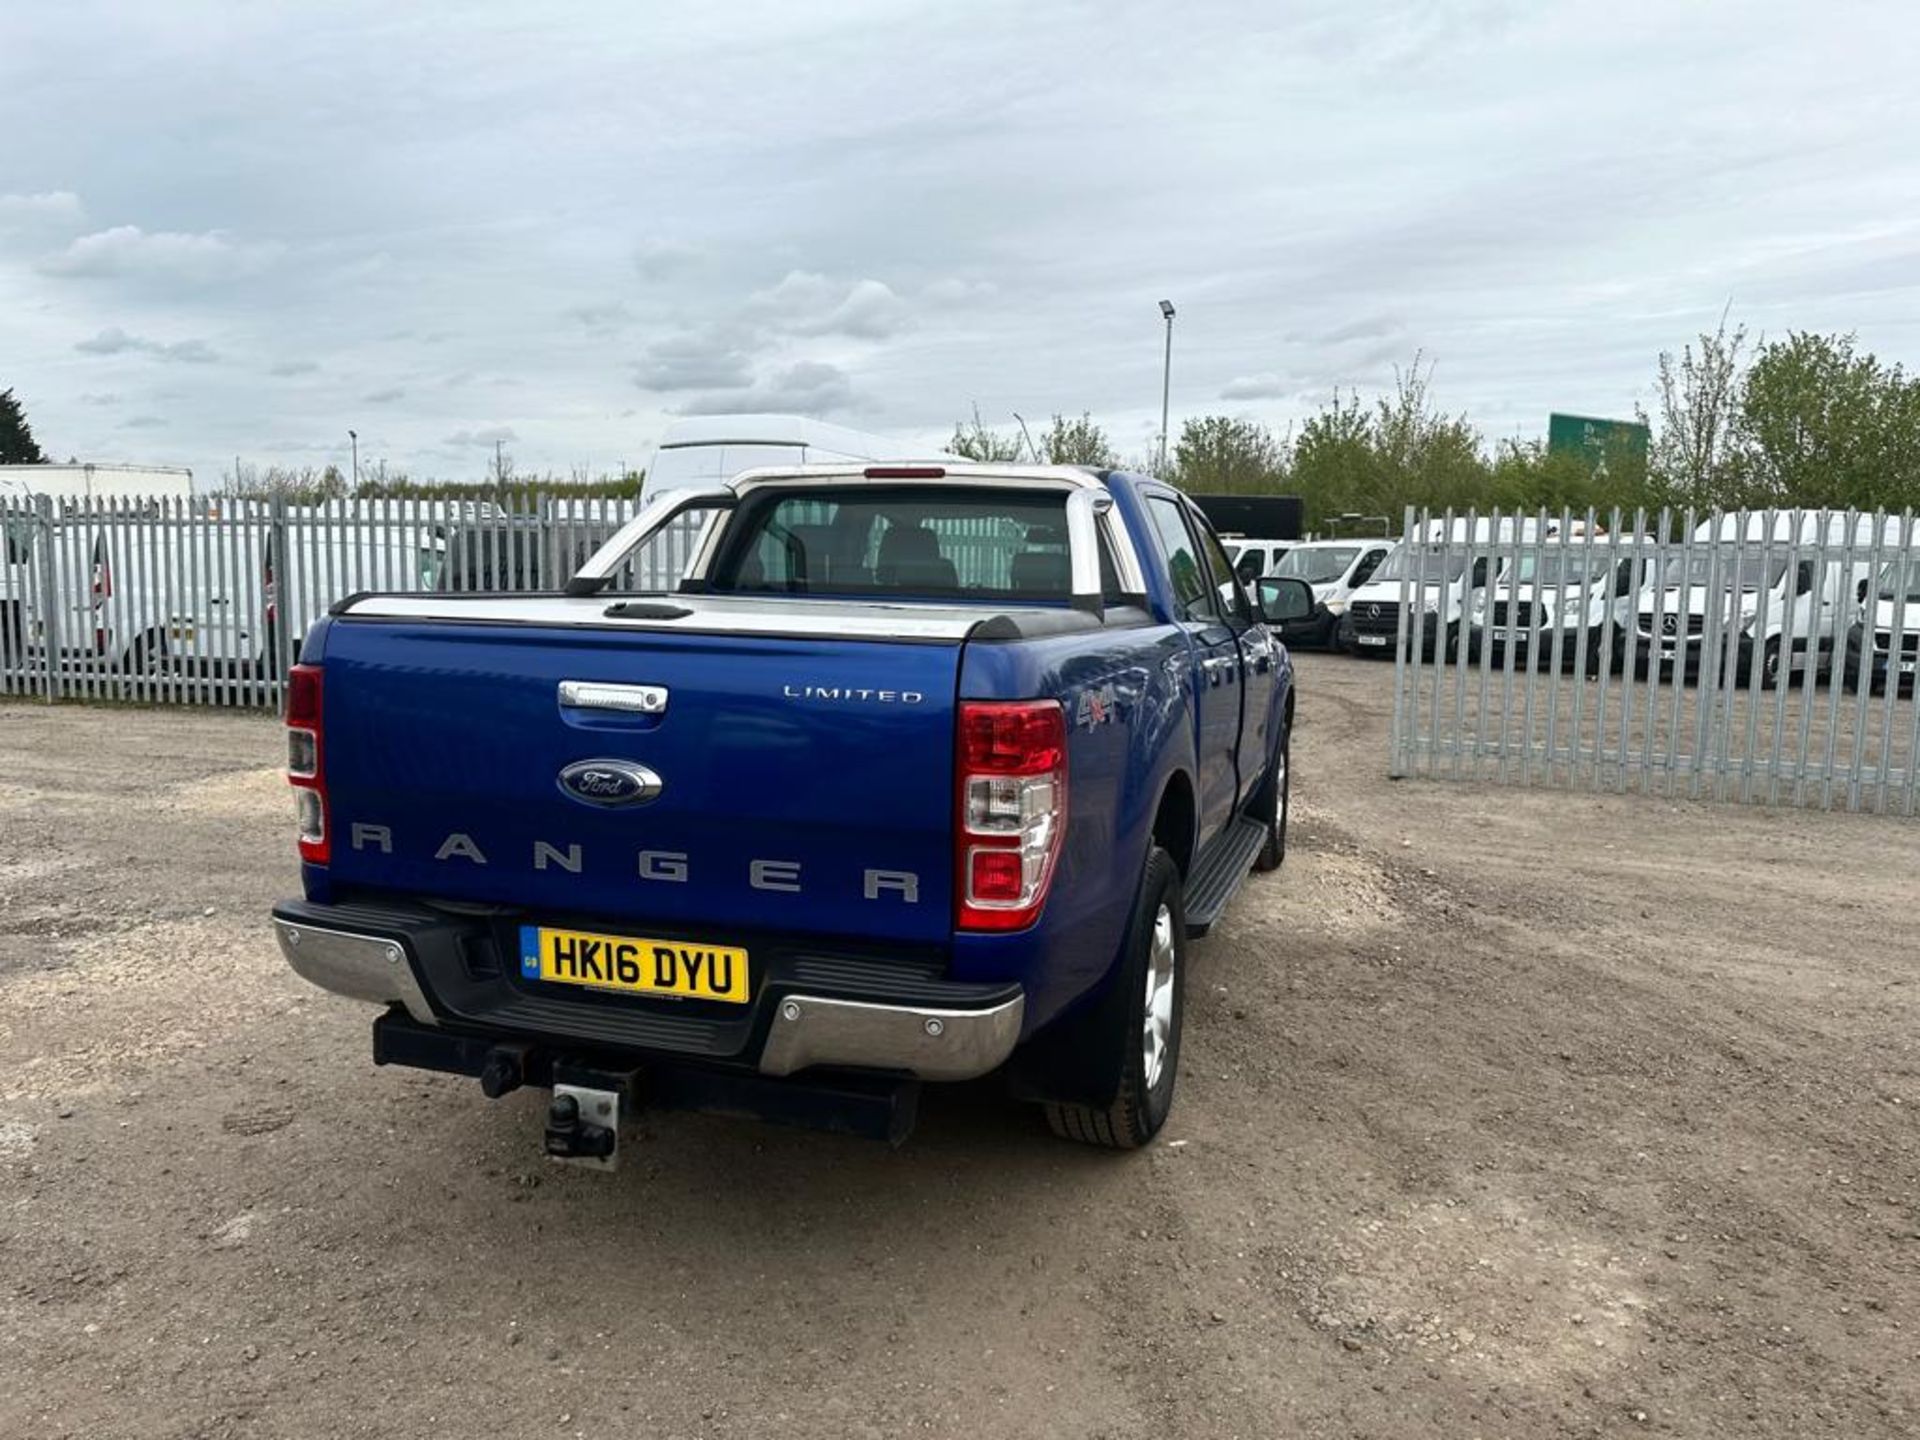 ** ON SALE ** Ford Ranger Limited DCI TDCI 160 4X4 2016 '16 Reg'-Automatic - A/C - -Bluetooth-No Vat - Image 11 of 38